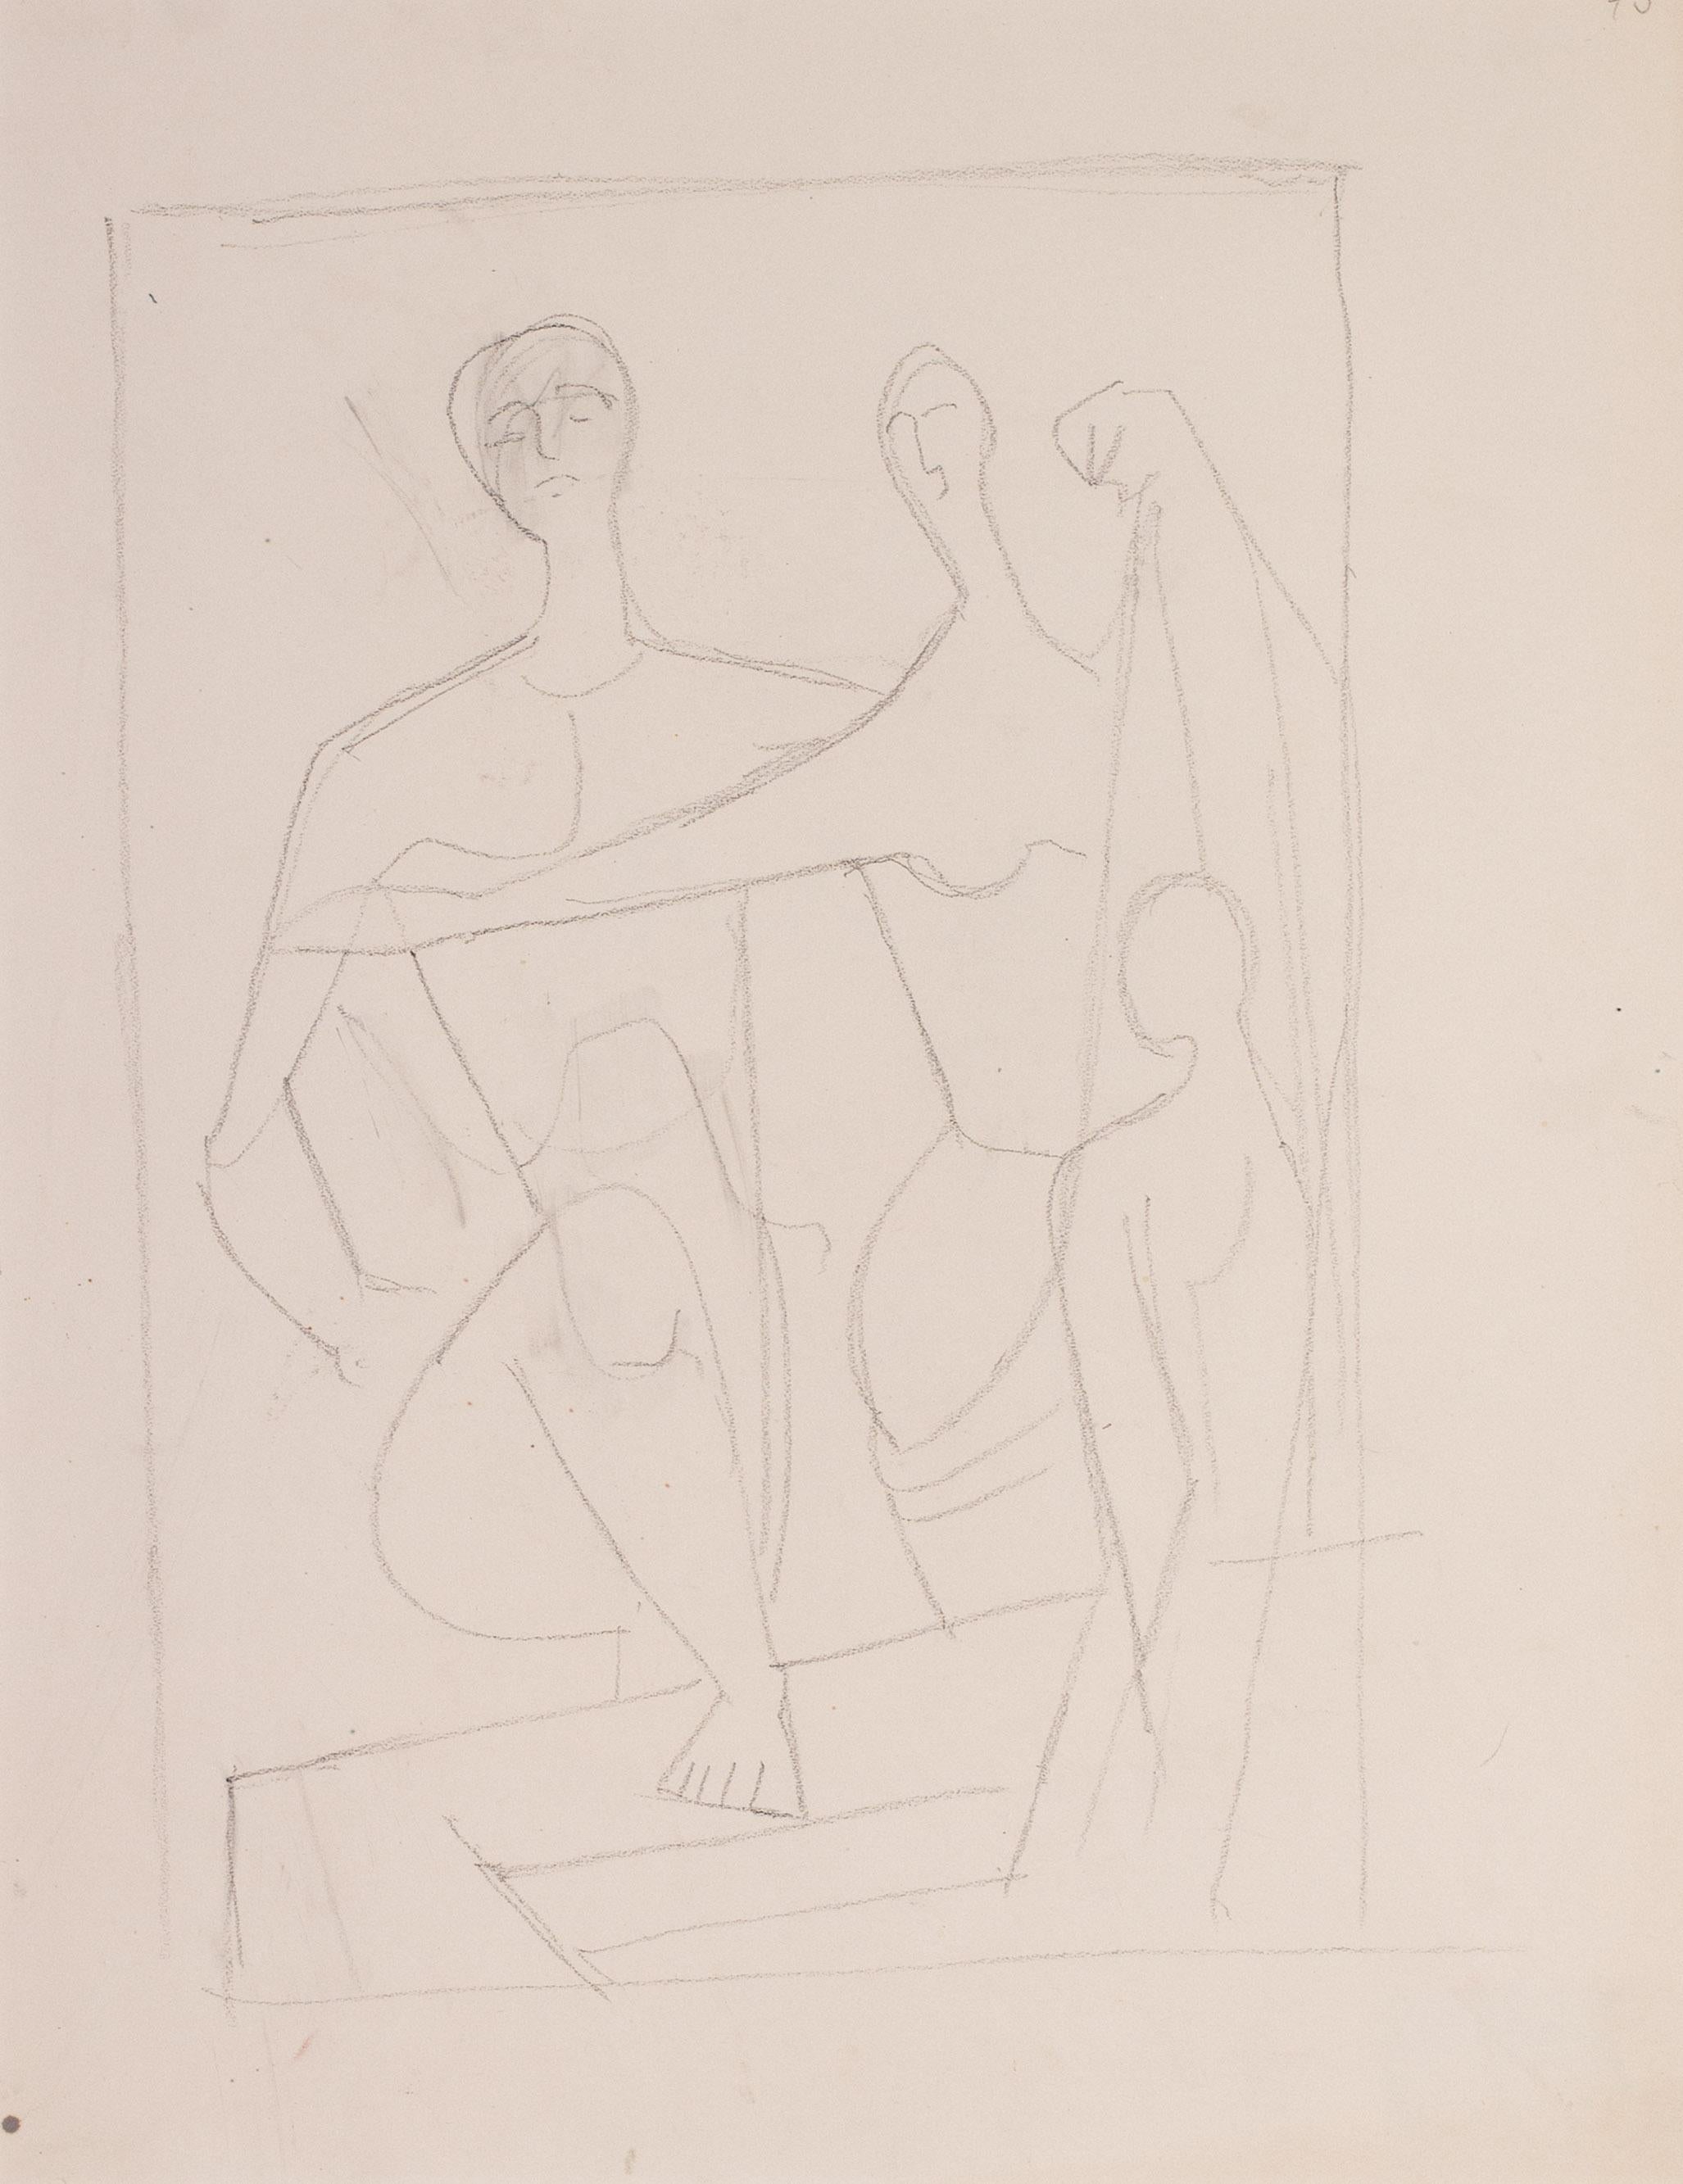 Carl Hofer (German, 1875 – 1955) 
Die Badegaste II (The bathers)
Black crayon on paper
19.1/4 x 15 in. (49 x 38 cm.) 

With studio stamp (on the reverse) and signature of the artist’s wife Elizabeth Hofer


Provenance: These works come from the